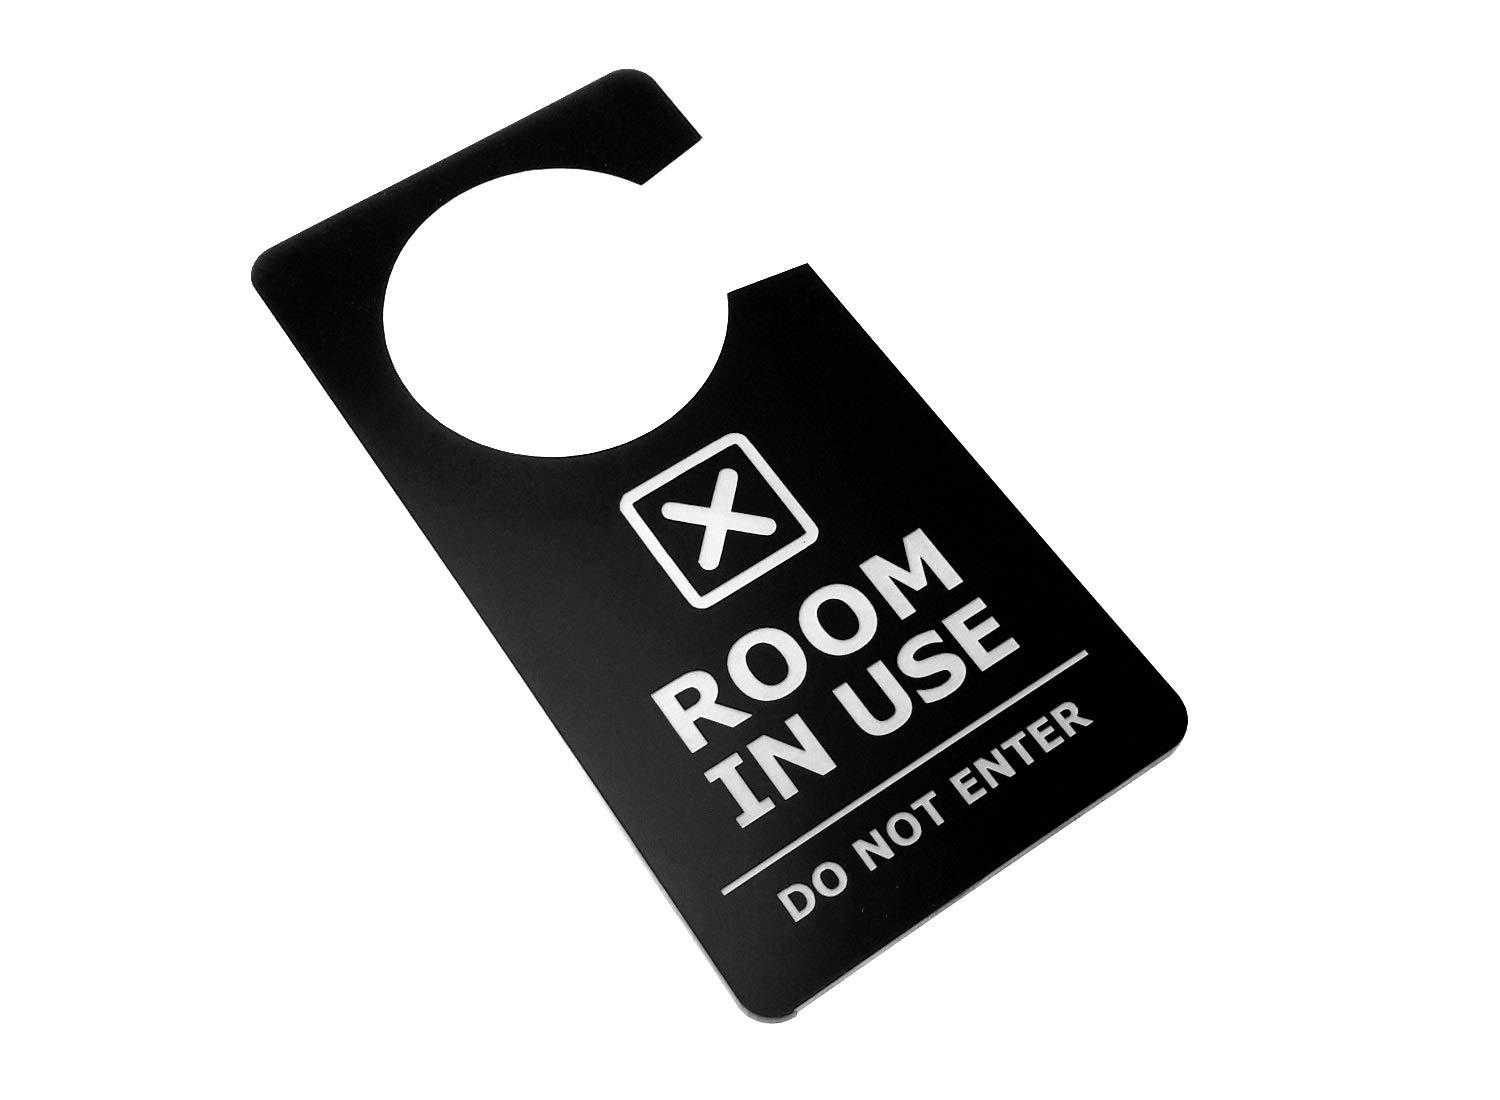 OriginDesigned Stunning Contemporary Bold Black and White Room In Use Room Vacant Door Hanger Sign for Hotels, B&Bs and Lodges Double Sided 3mm Black and White Acrylic